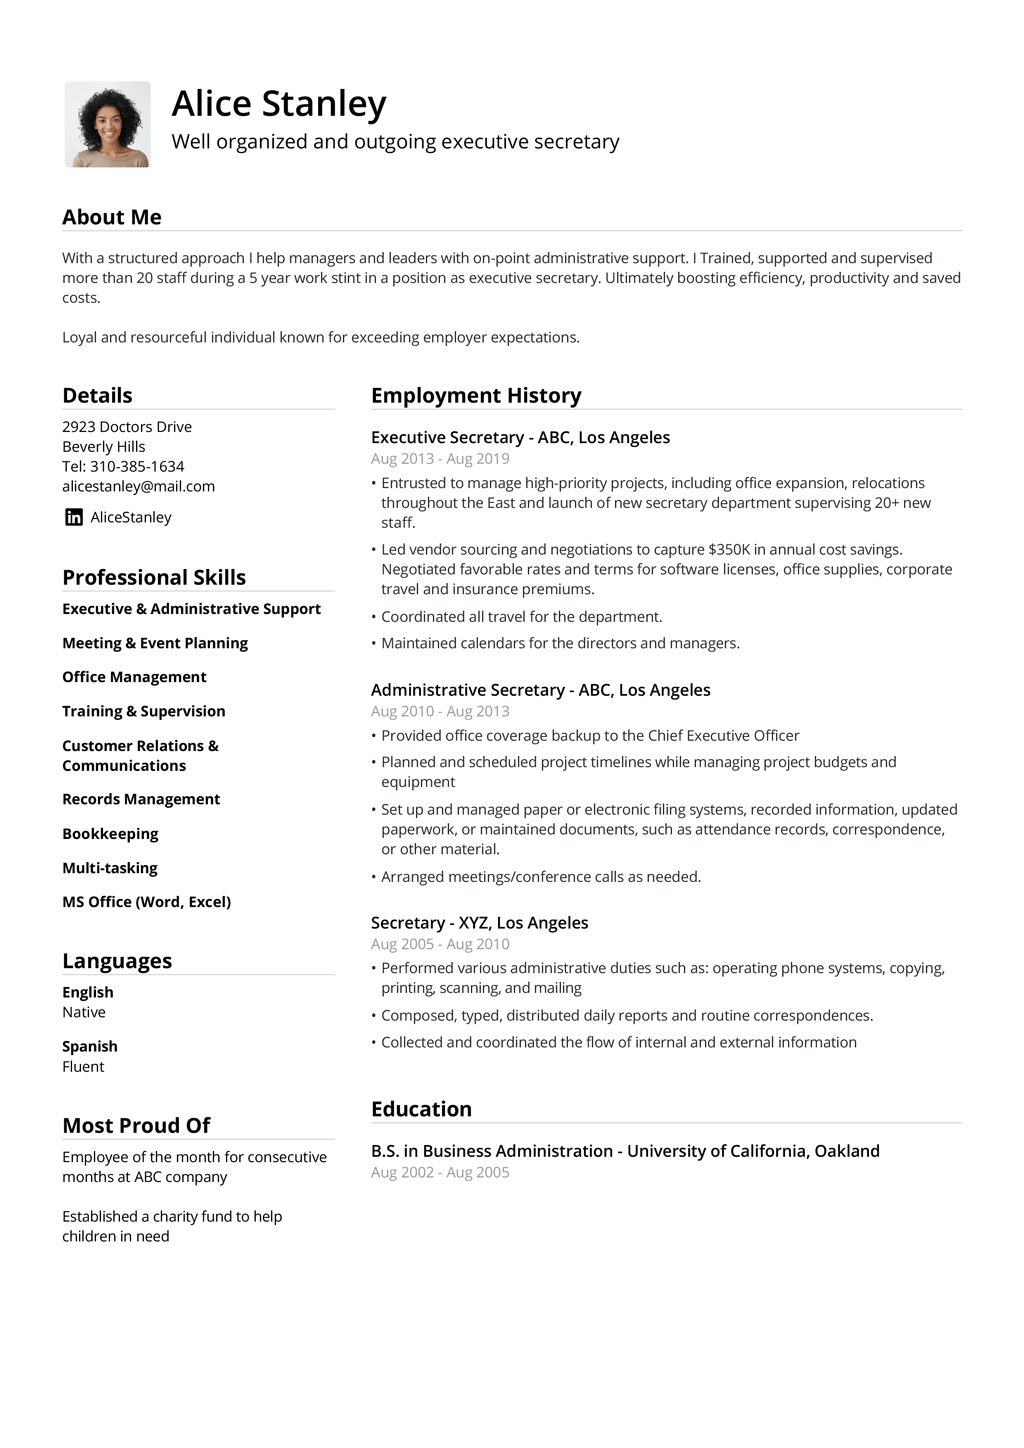 Open Mike on resume